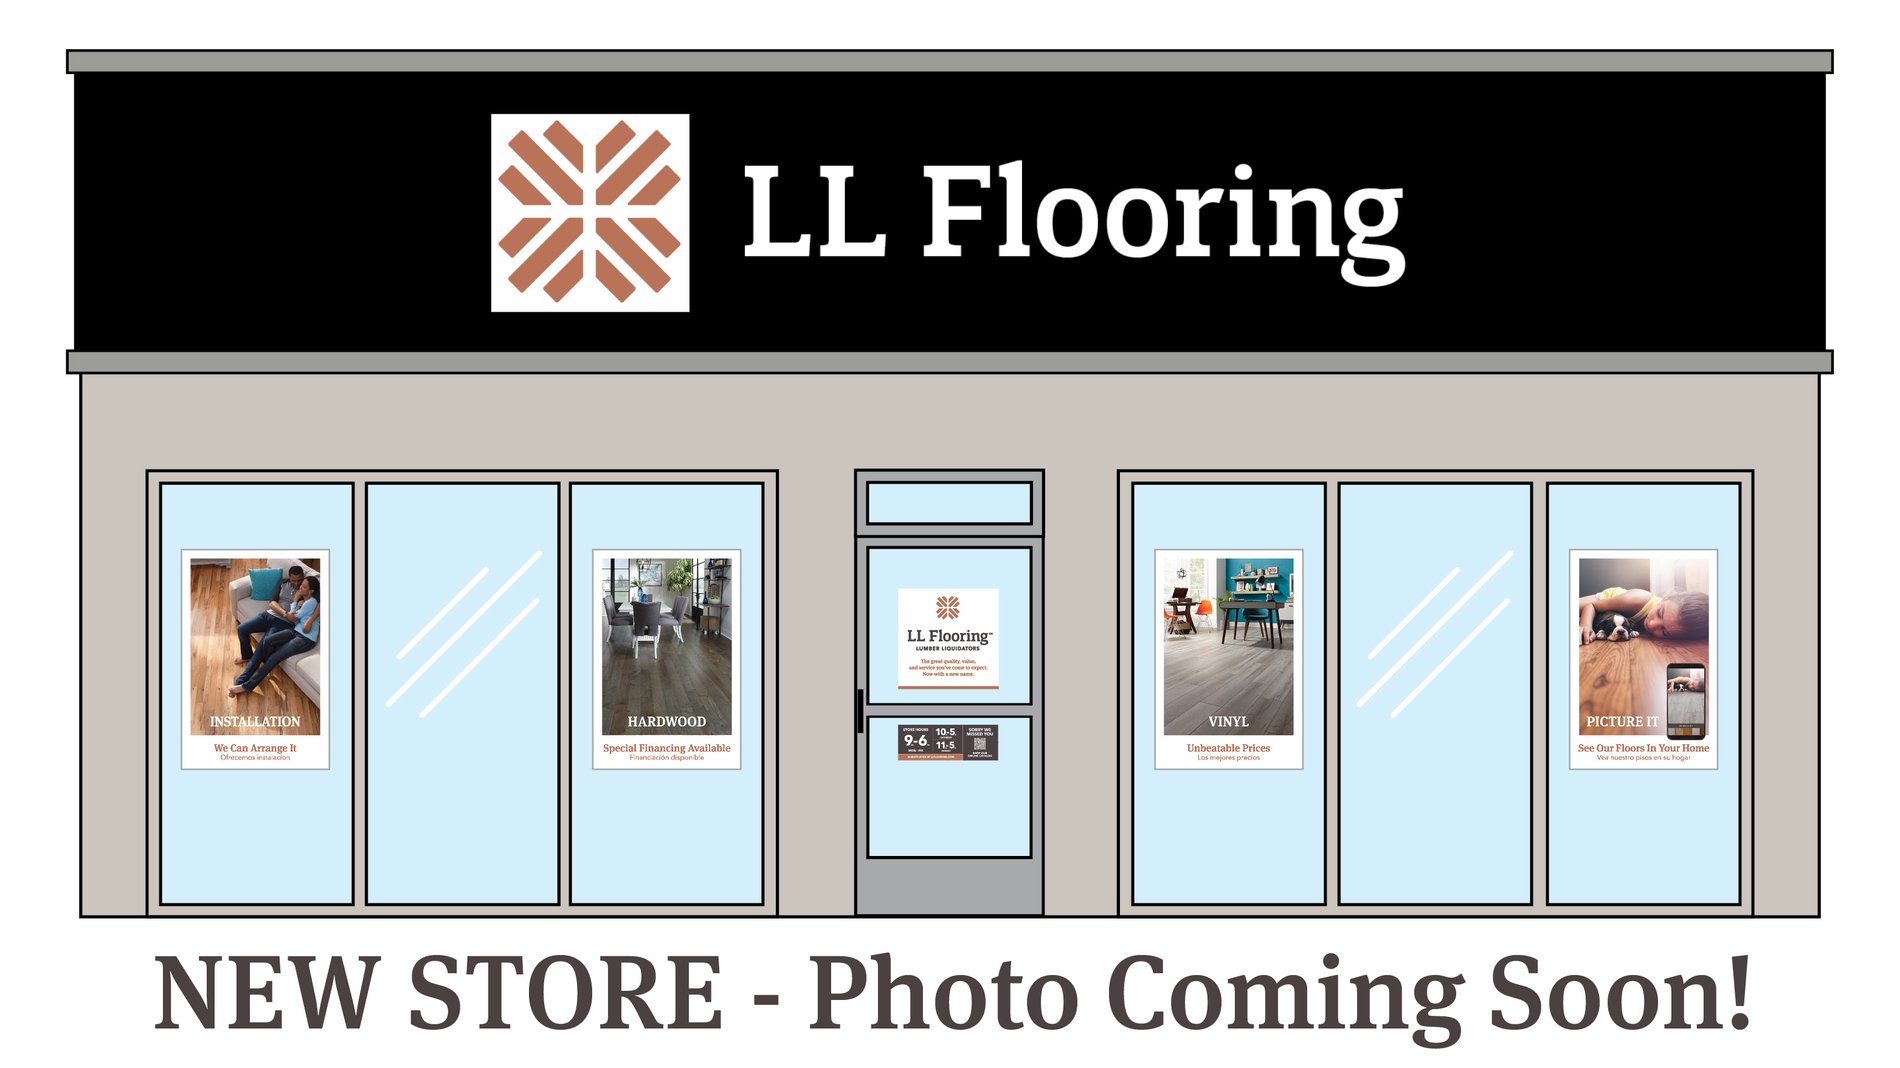 LL Flooring #1471 Manahawkin | 733 Route 72 West | Storefront Photo Coming Soon